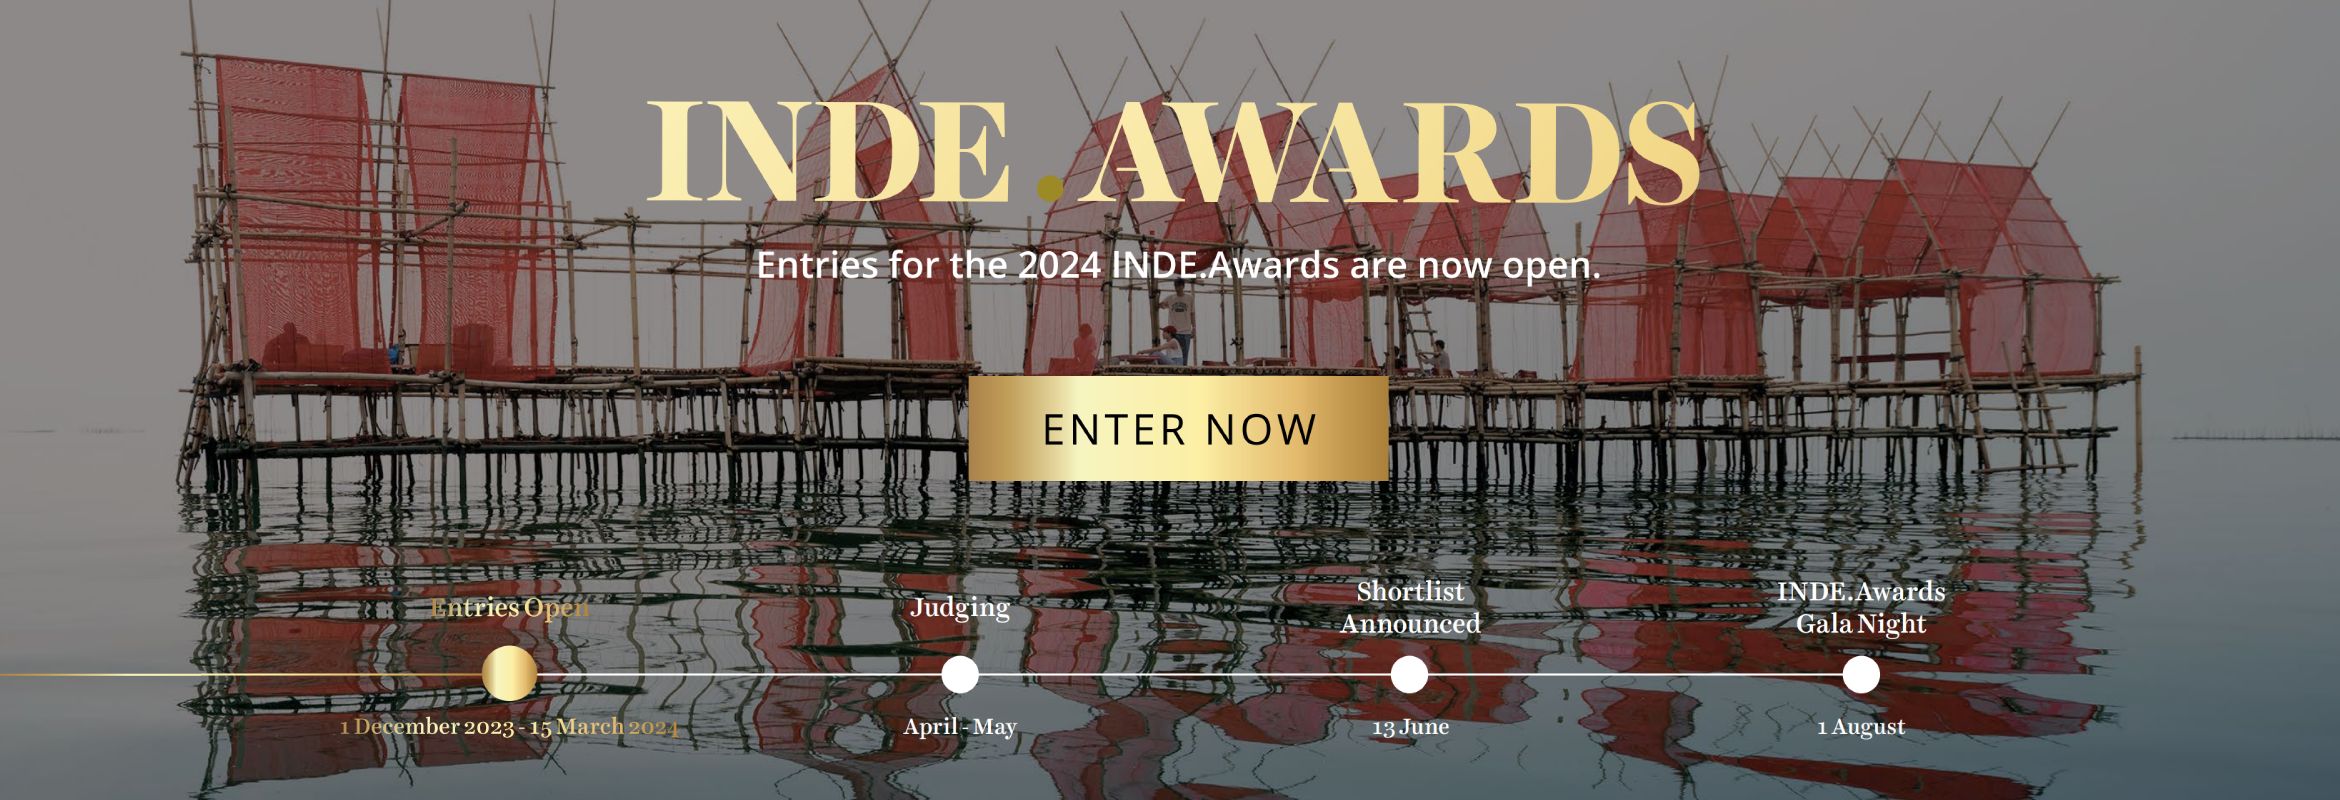 The 2024 INDE.Awards entries are now open.